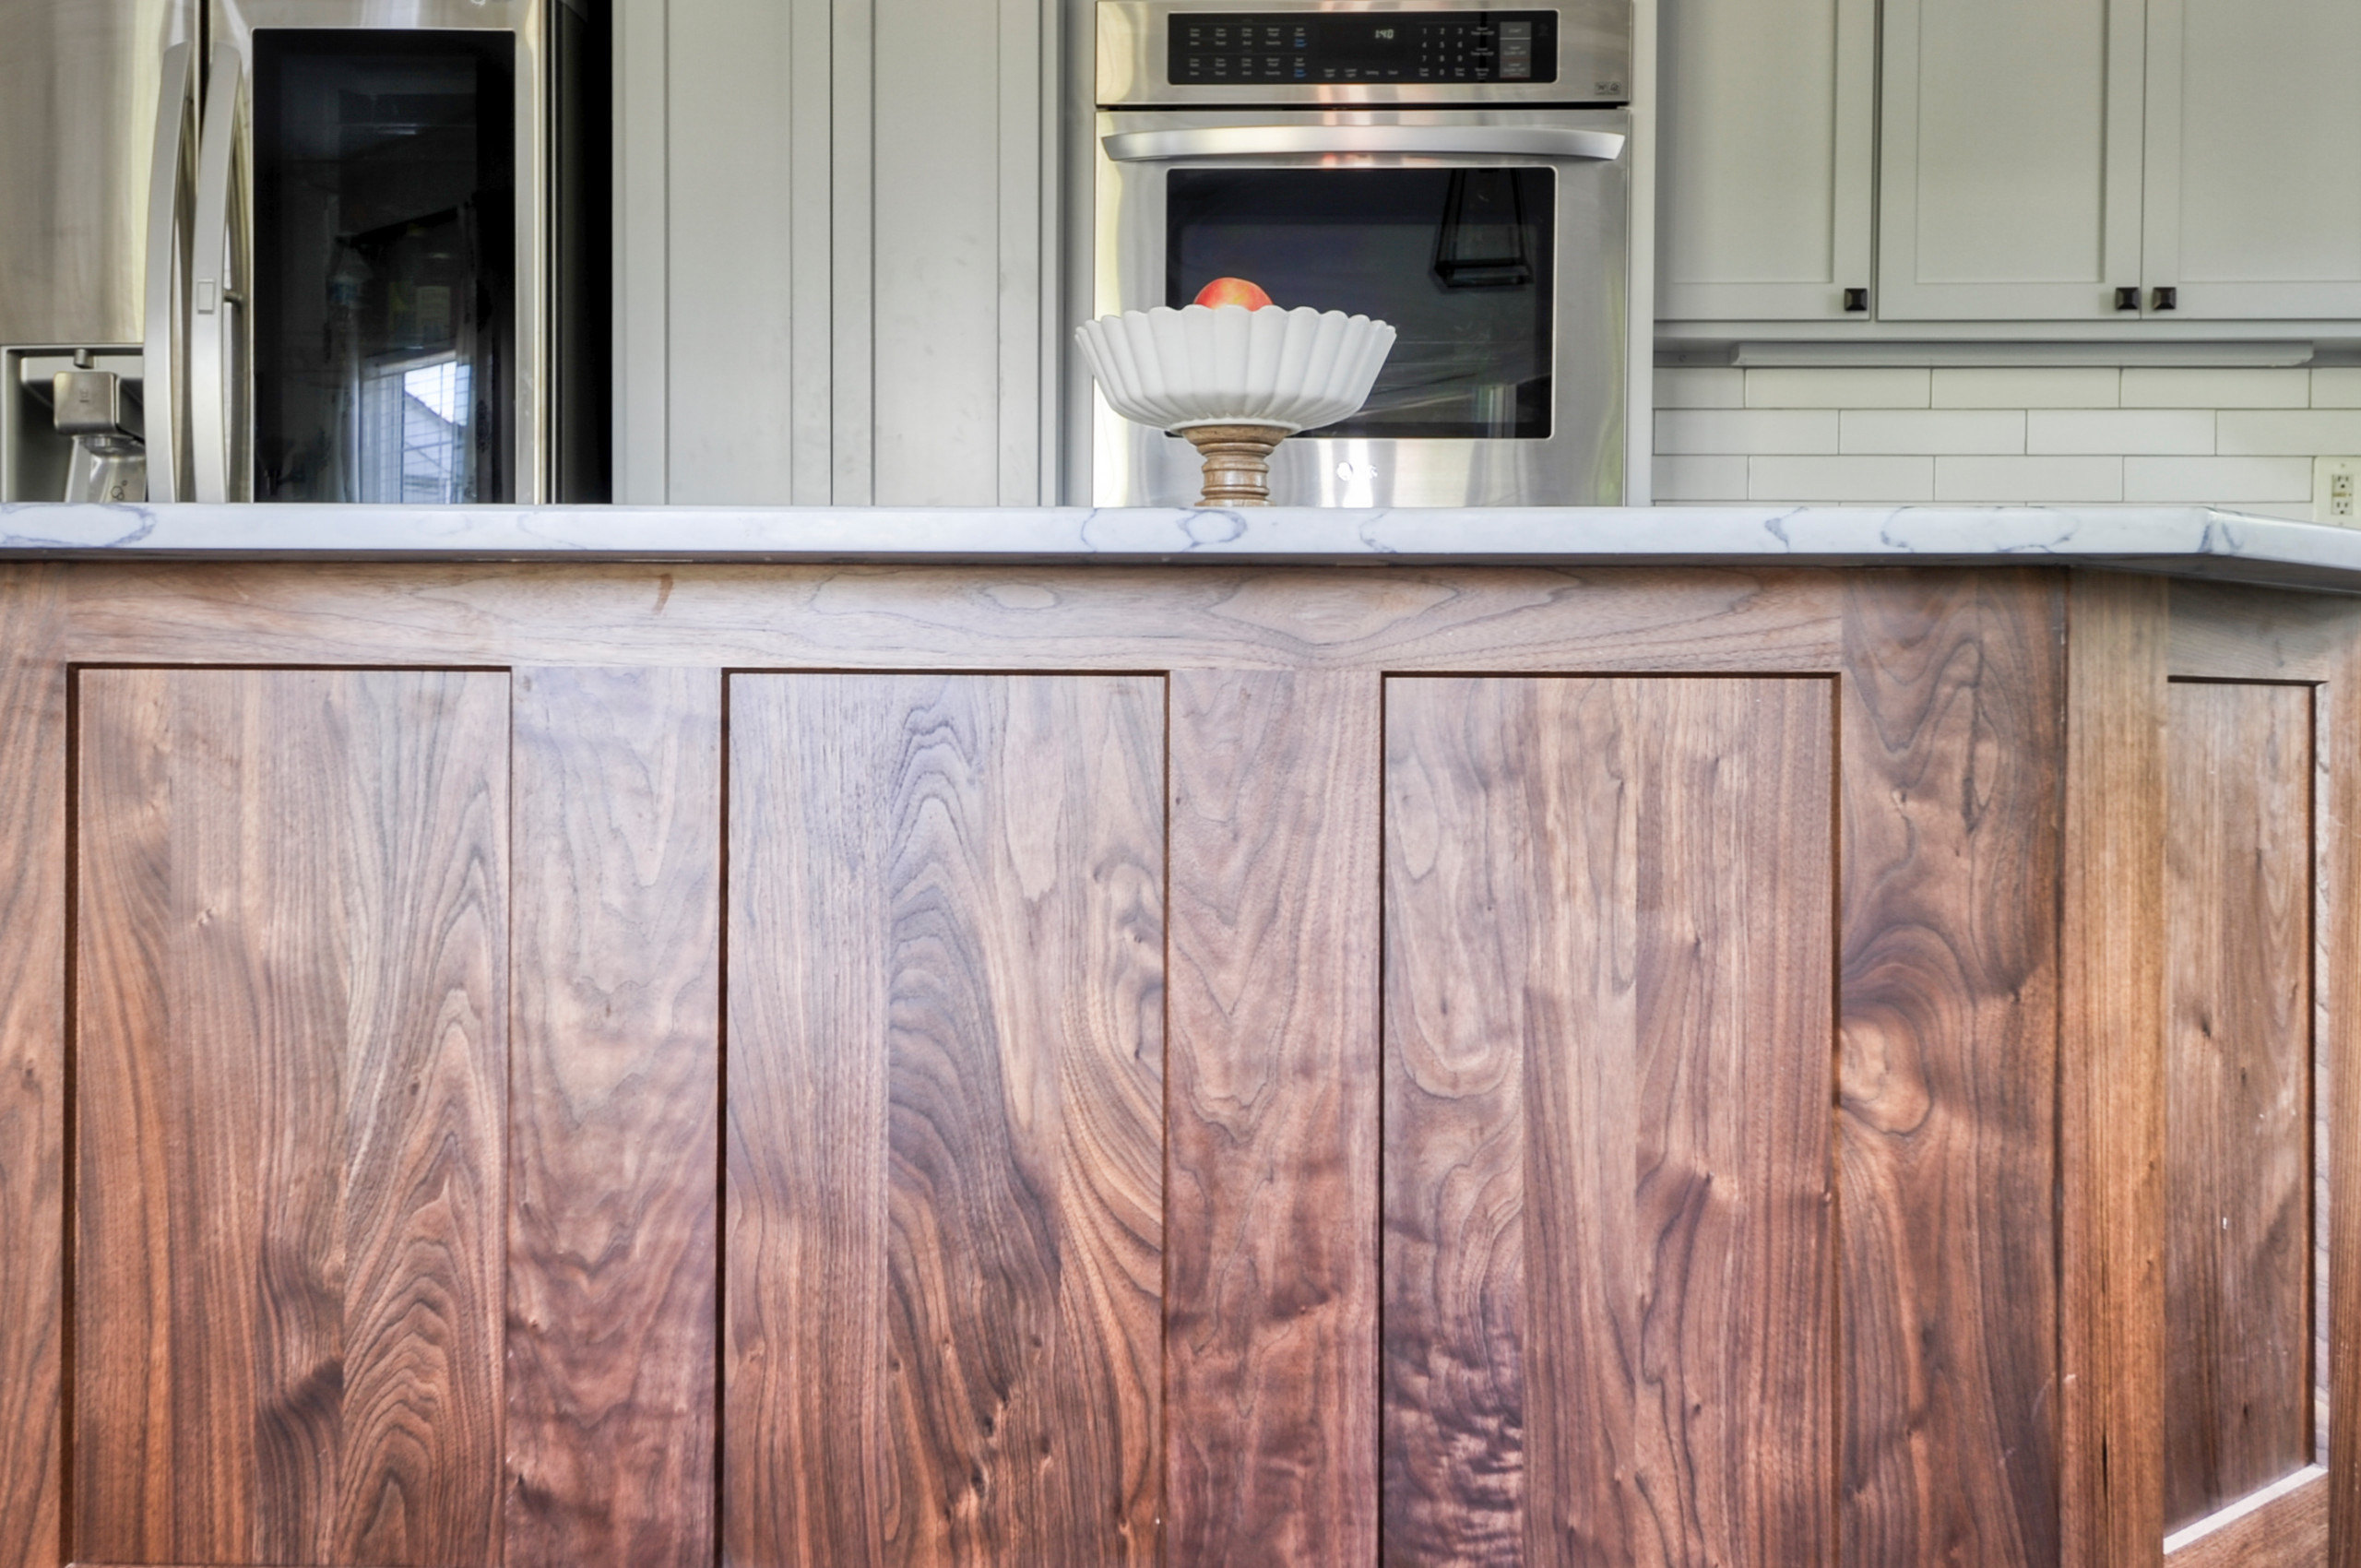 Storm (AF-700) Gray Painted Cabinets with Warm Natural Walnut Accents